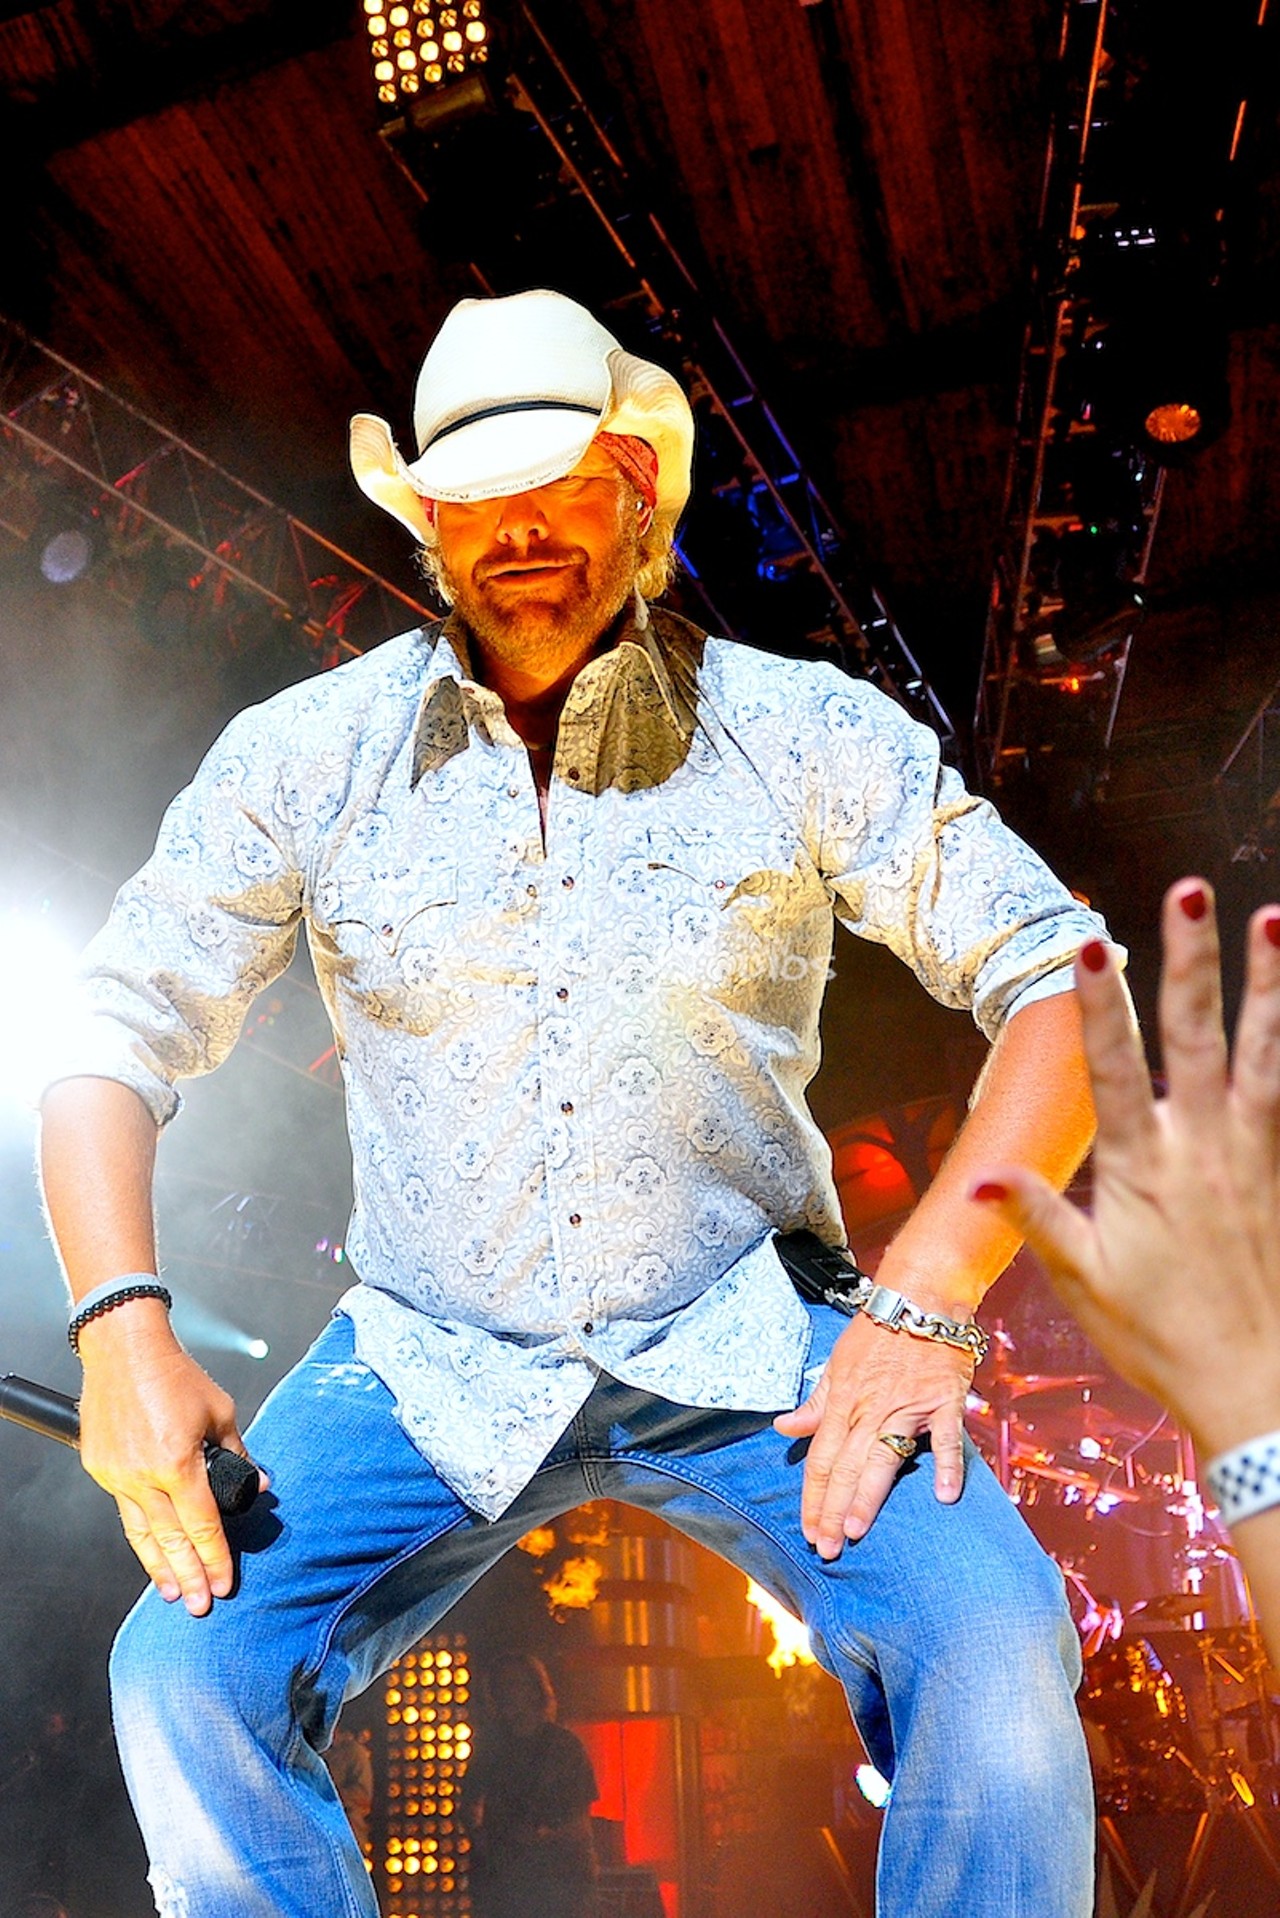 Toby Keith at Blossom